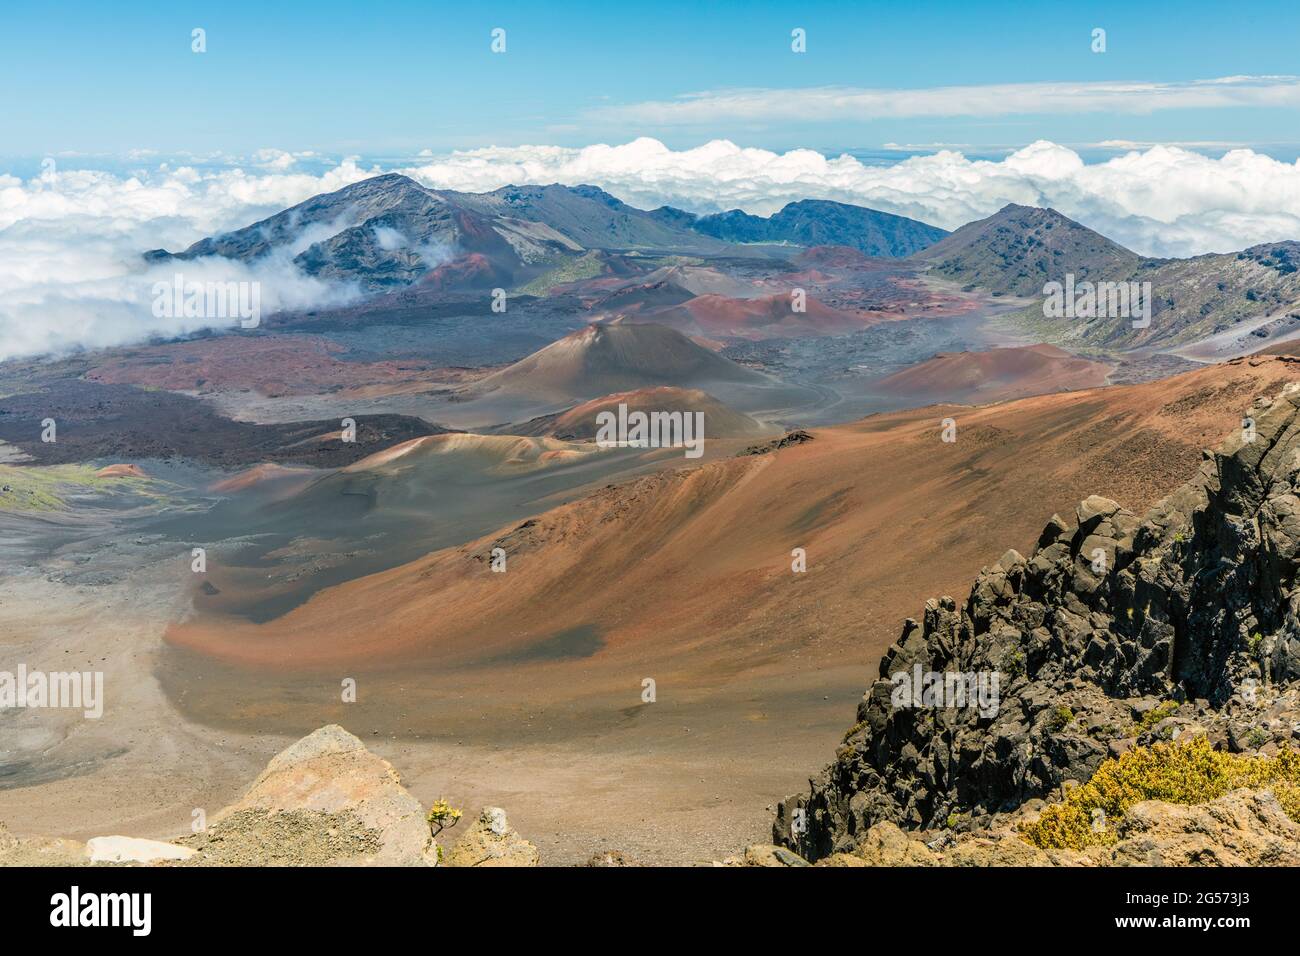 Above the Clouds: View of Haleakalā National Park summit in Maui, Hawaii, over 10,000 feet above sea level Stock Photo